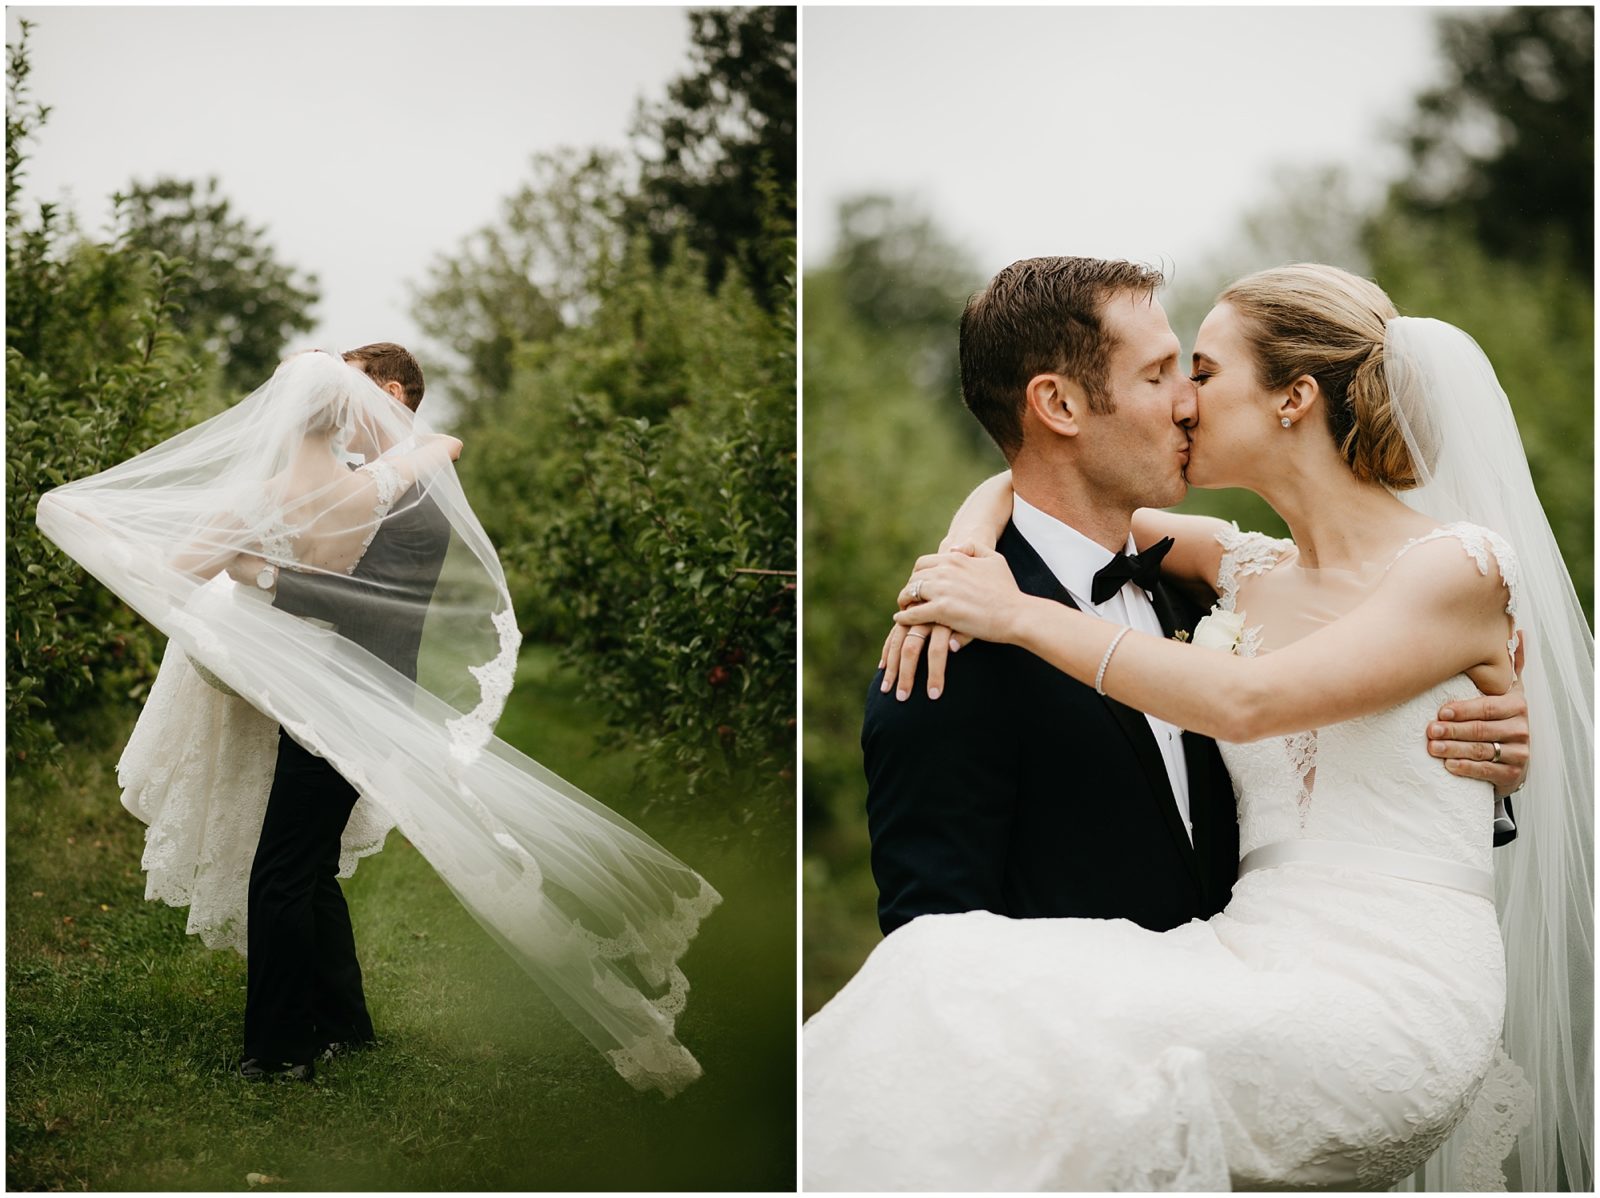 Bride and groom portraits in apple orchard during New England Fall wedding